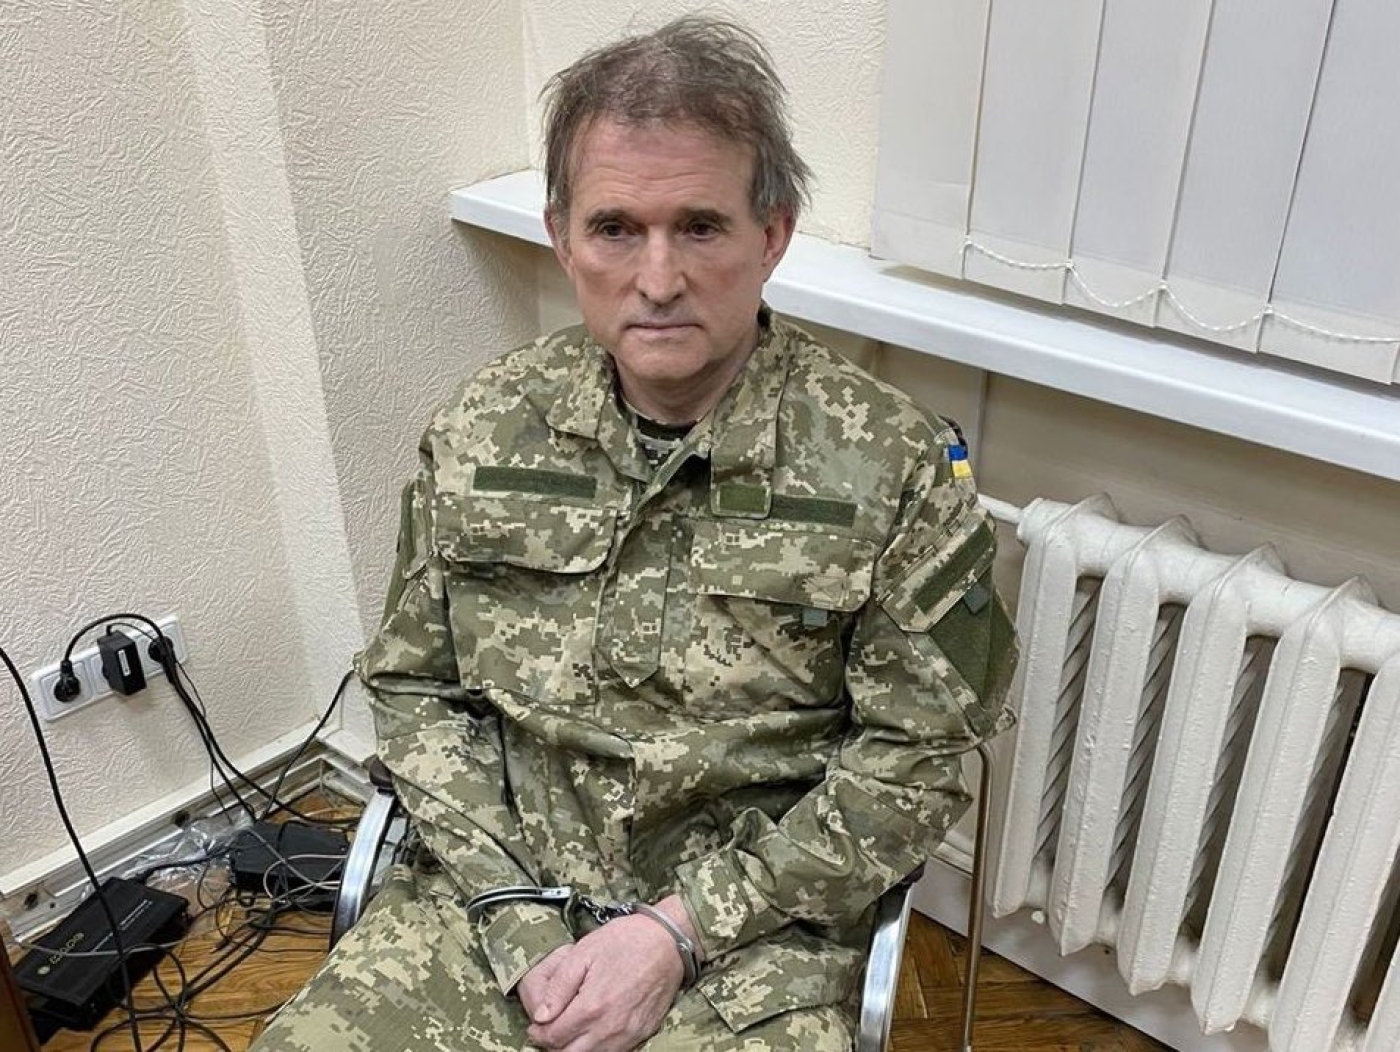 Pro-Russian Ukrainian politician Viktor Medvedchuk in handcuffs after he is arrested by an operation of Ukraine security forces on 12 April (Reuters)